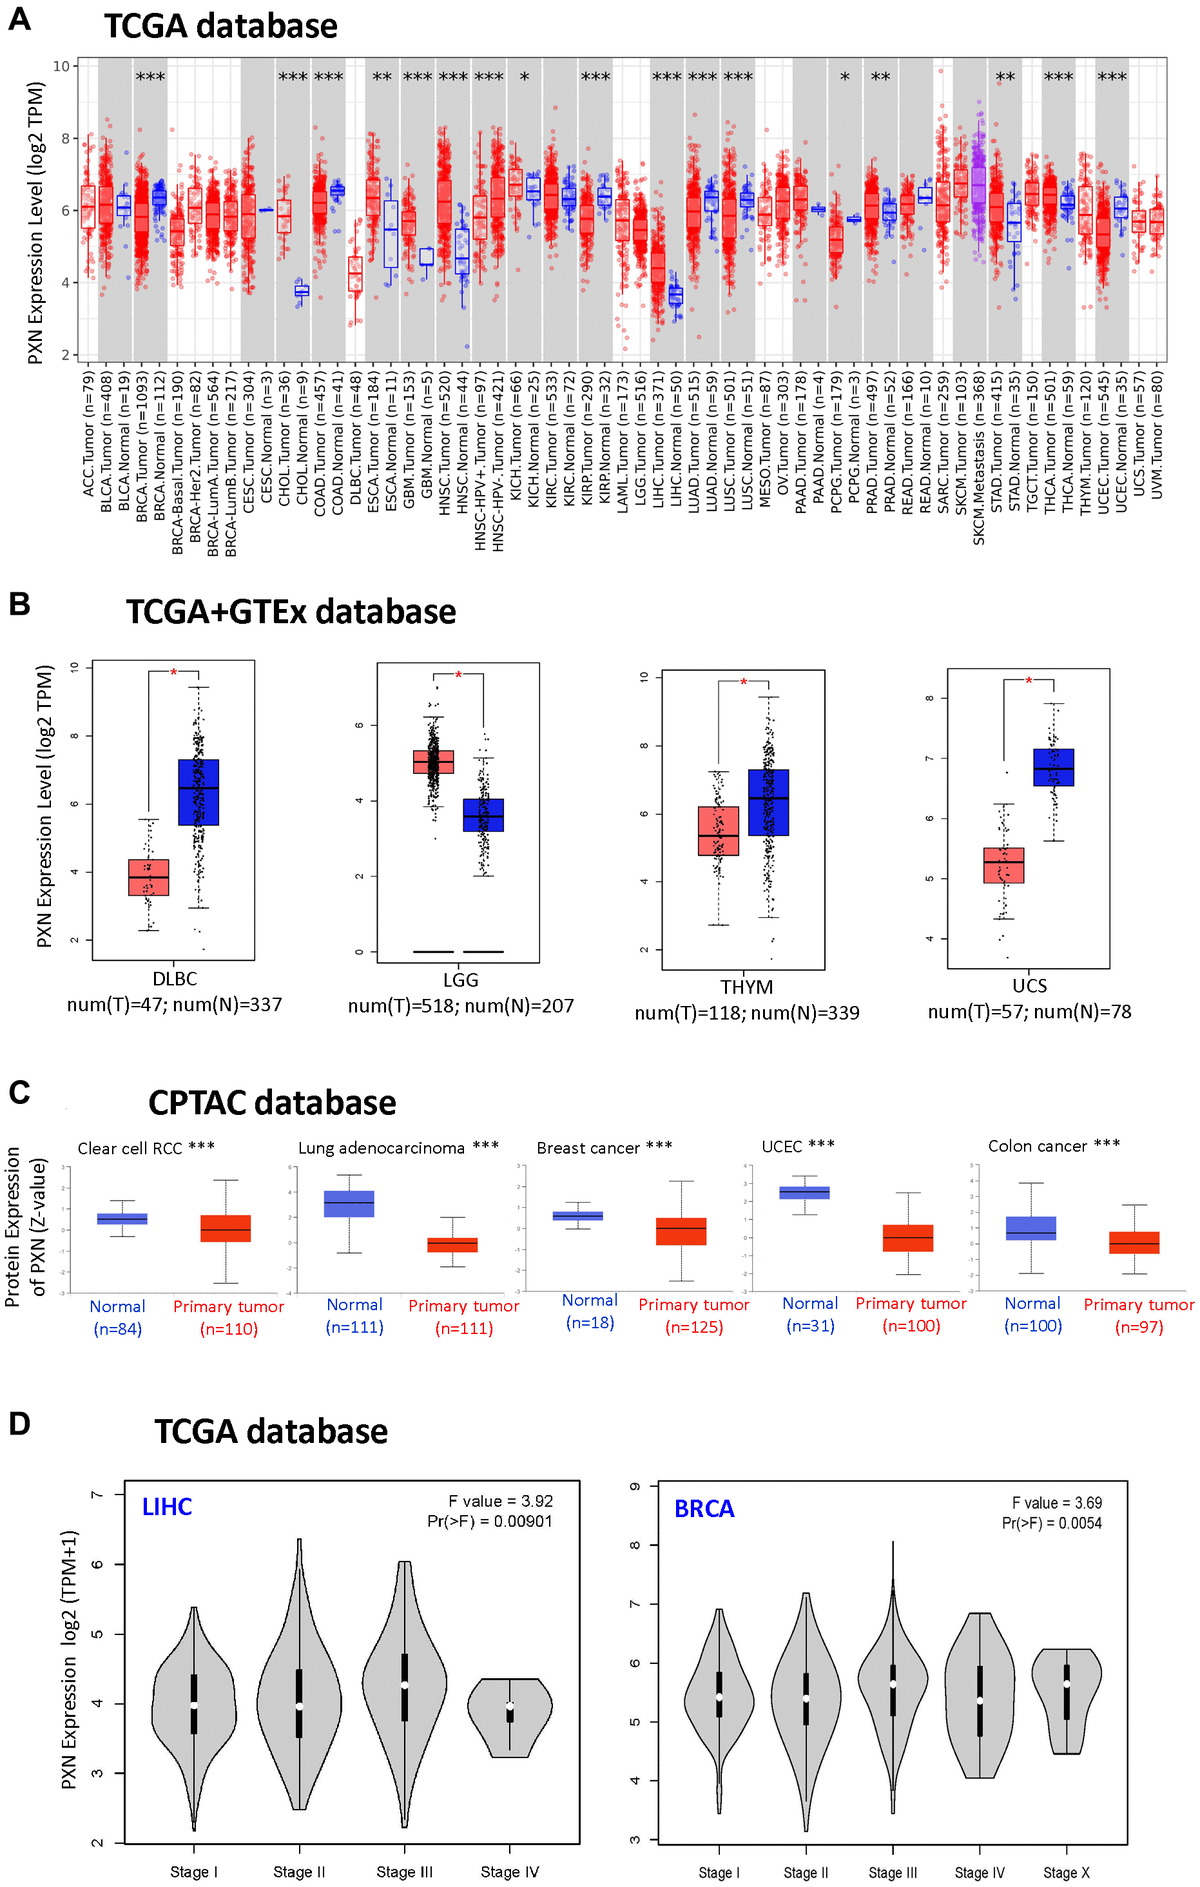 PXN gene expression in different tumors and pathological stages (A) using TIMER2 to analyze the expression of PXN in different cancers or specific cancer subtypes (*P **P ***P B) using the box plot data to analyze the type of lymphoid neoplasm DLBC, LGG, thymoma, and uterine carcinosarcoma in TCGA, for which the corresponding normal tissues of the GTEx database were included as controls (**P C) Using the CPTAC dataset, PXN total protein expression levels in normal tissue versus primary tissue were analyzed for RCC, lung adenocarcinoma, breast cancer, UCEC, and colon cancer (***P D) Using TCGA data, PXN gene expression was analyzed by main pathological stage (stage I, stage II, stage III, and stage IV) of LIHC and BRCA. Log2 (TPM + 1) was used for the log scale.